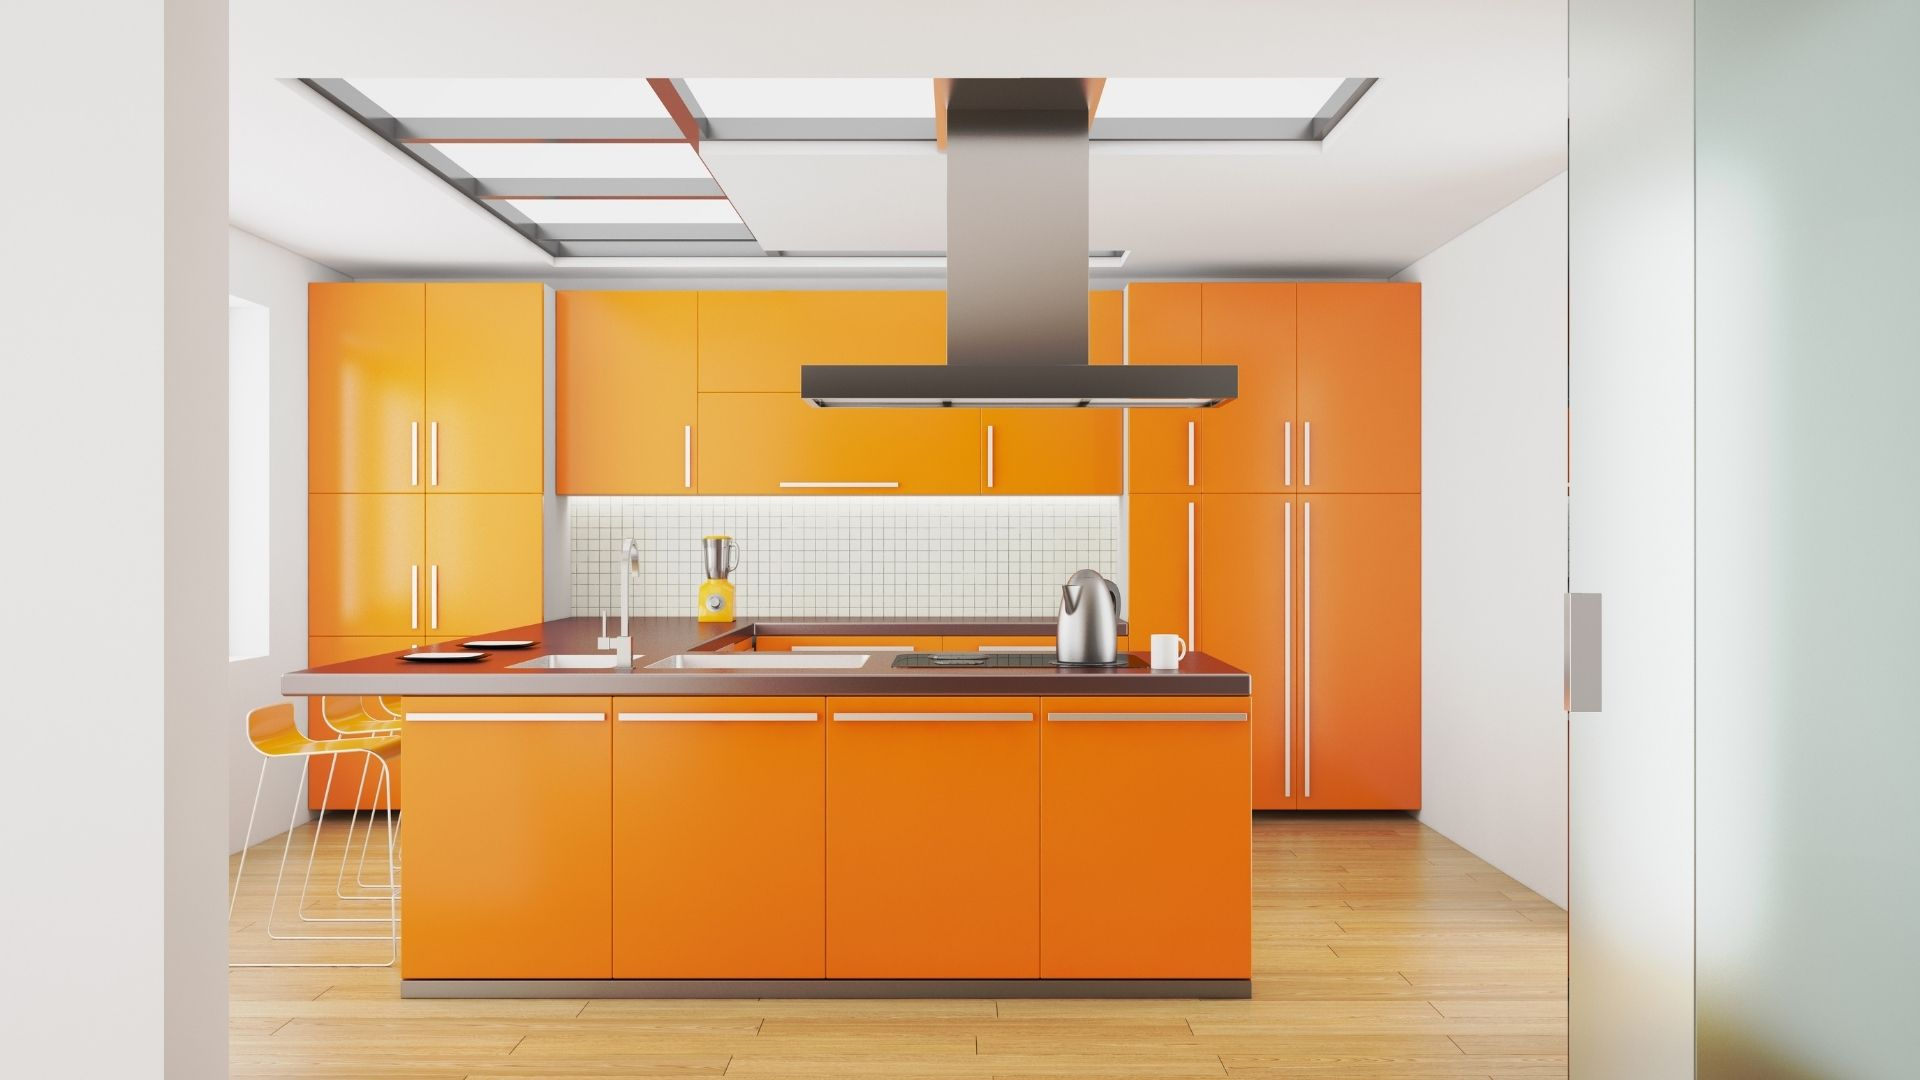 Bold and vibrant colors in a kitchen design